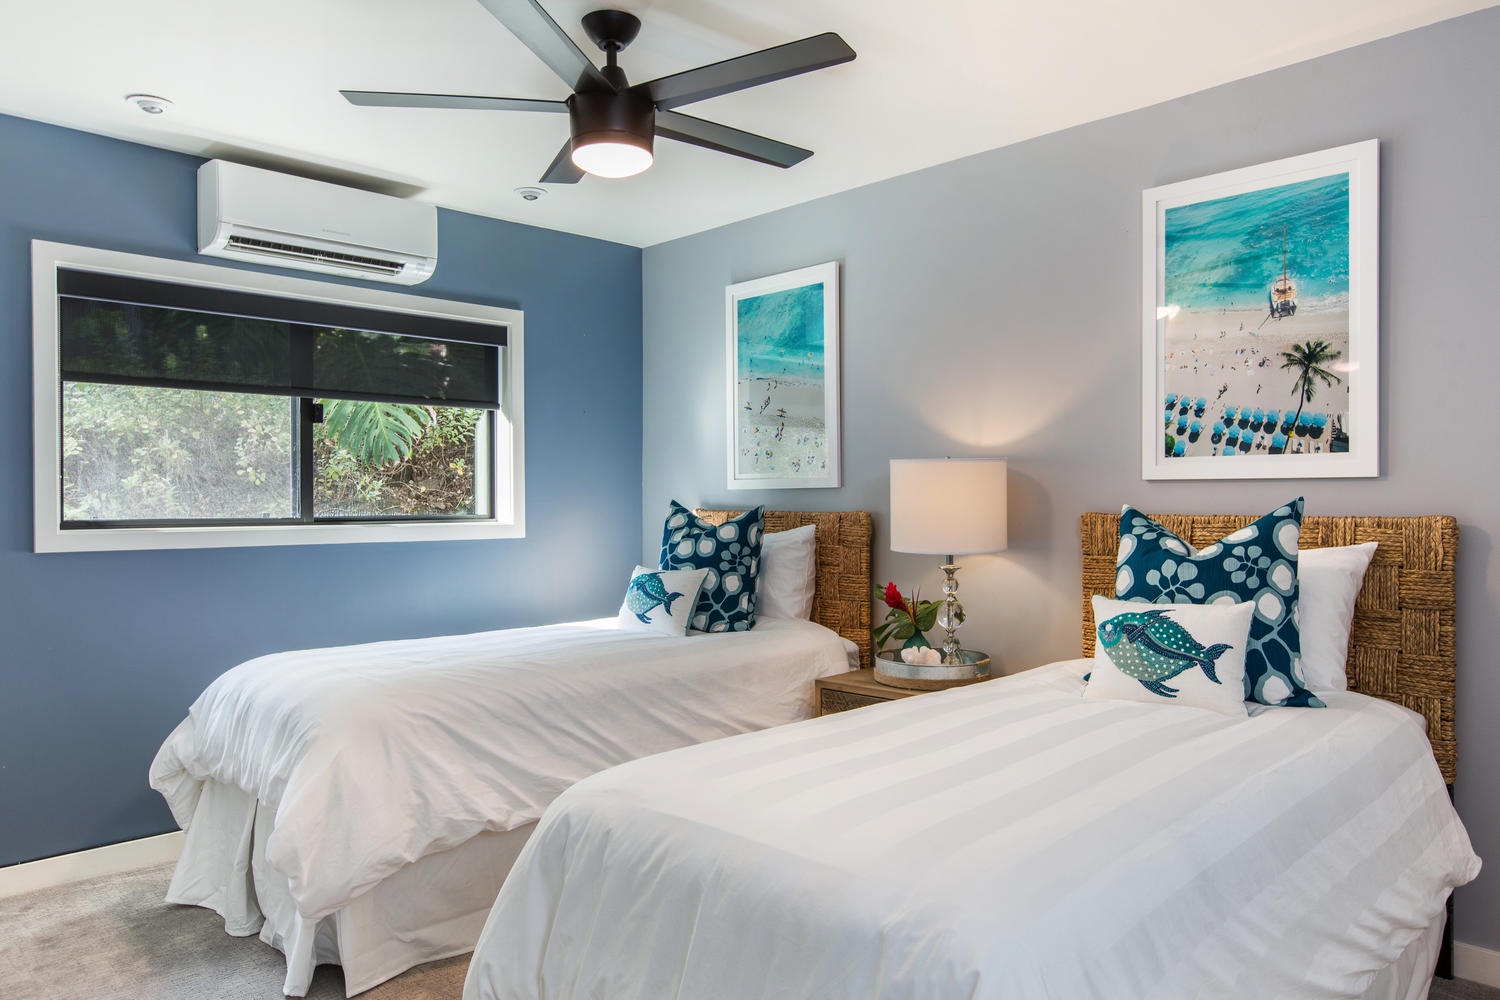 Honolulu Vacation Rentals, Aloha Nalu - Bedroom four - surf's up! Extra long twin beds are convertible to a king upon request.